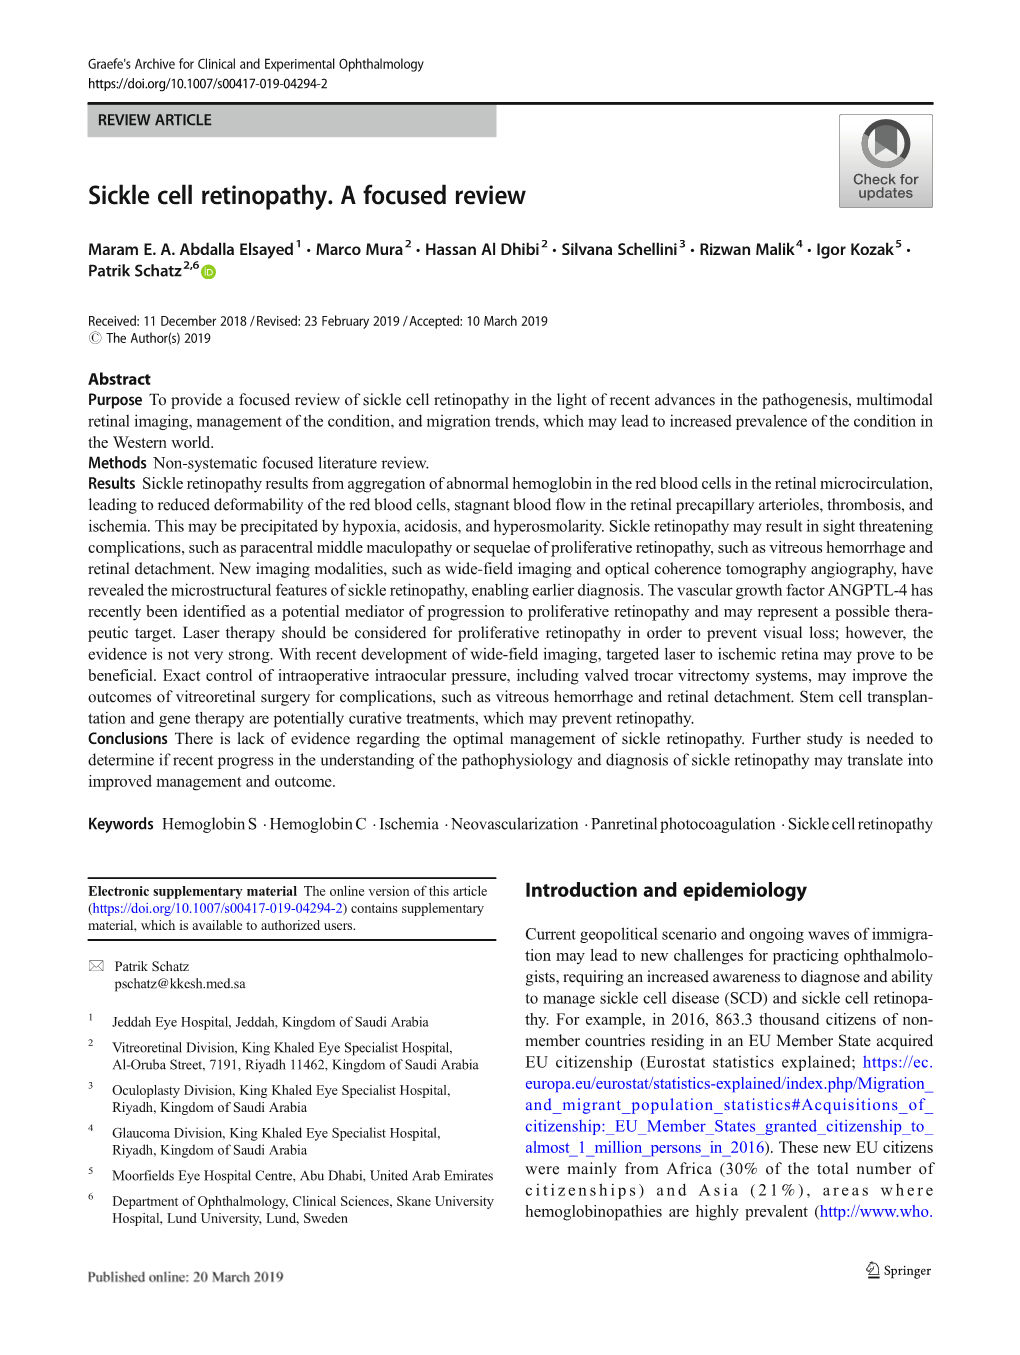 Sickle Cell Retinopathy. a Focused Review